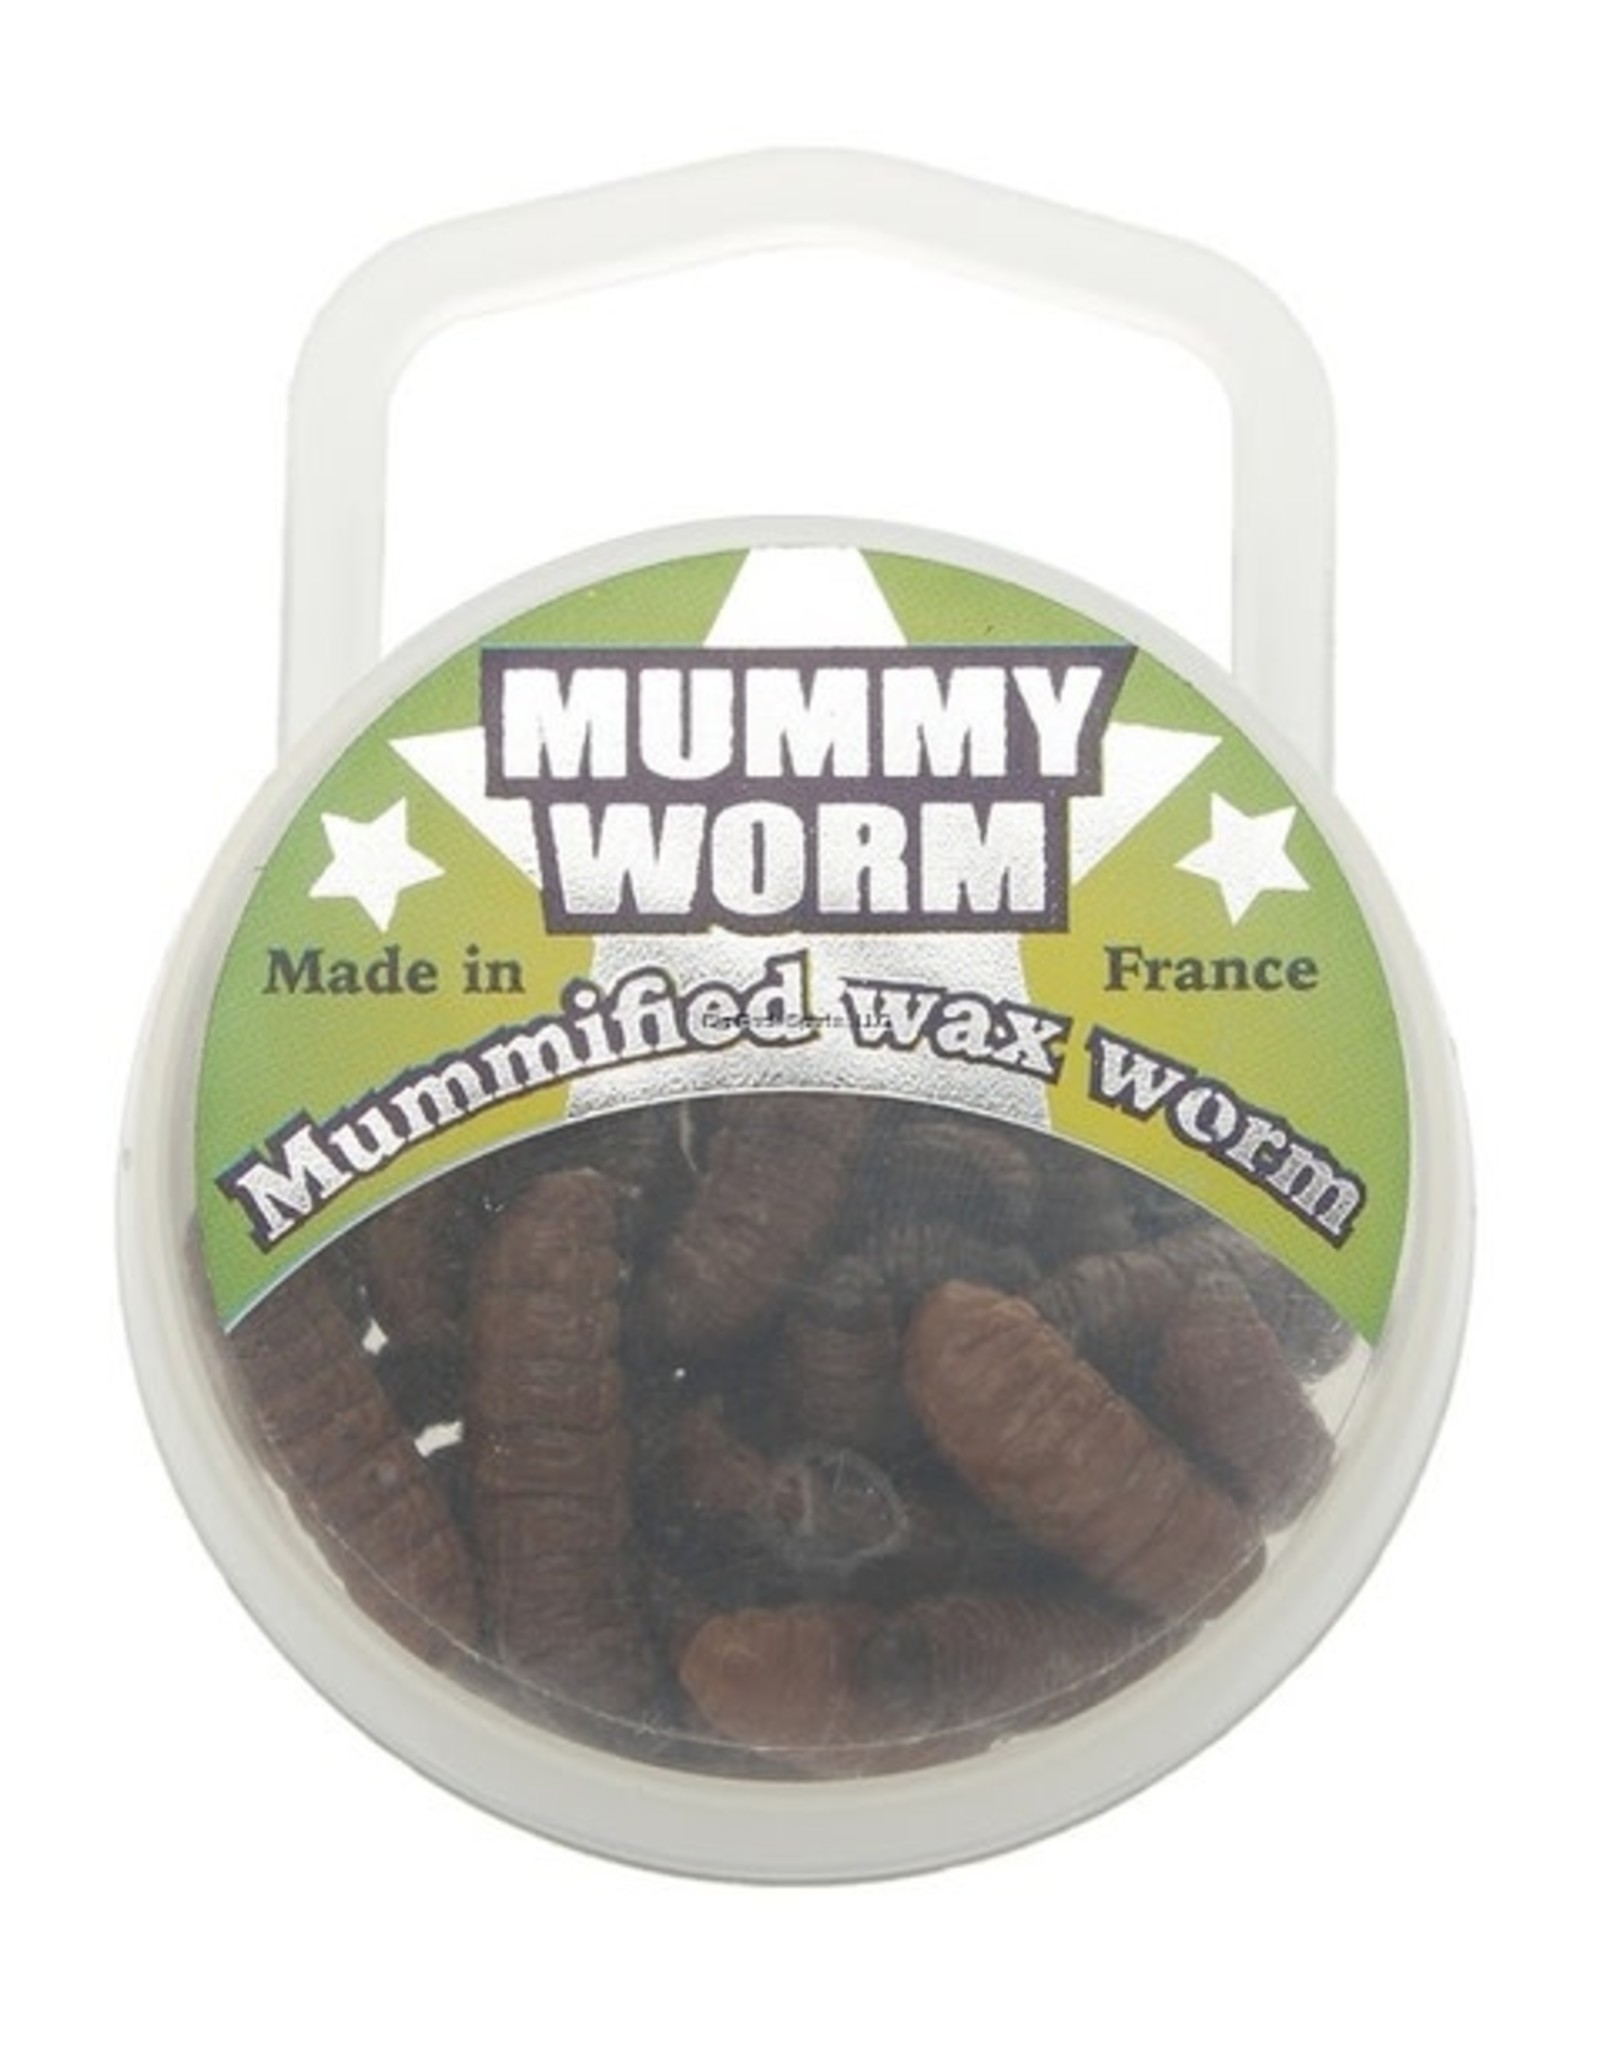 Eurotackle 00108 Mummy Worm, Preserved wax worms, Brown, 35+/pack